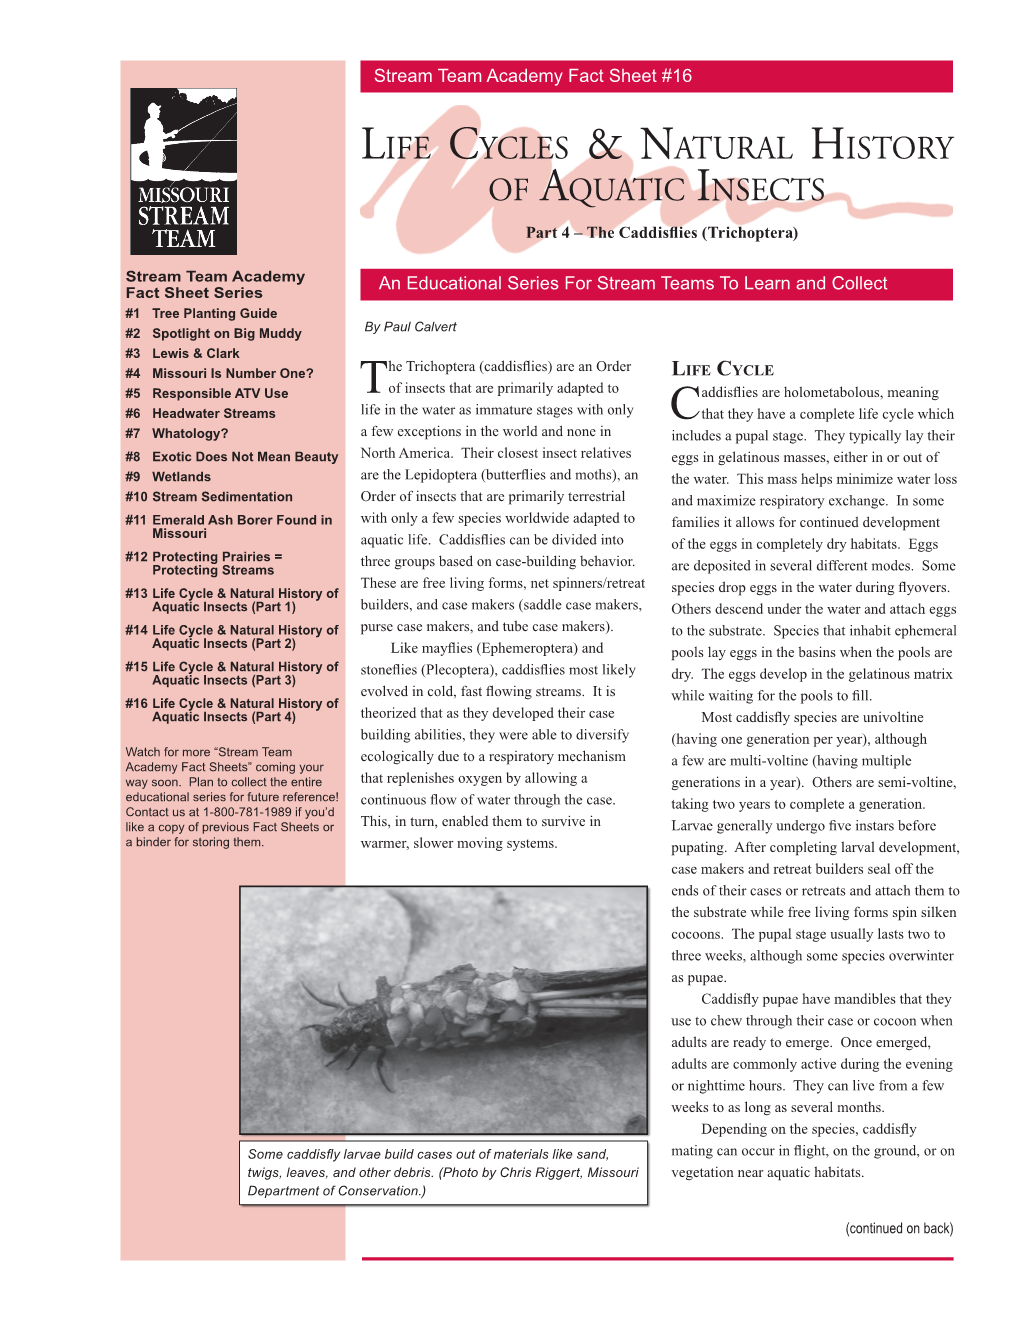 Life Cycles and Natural History of Aquatic Insects